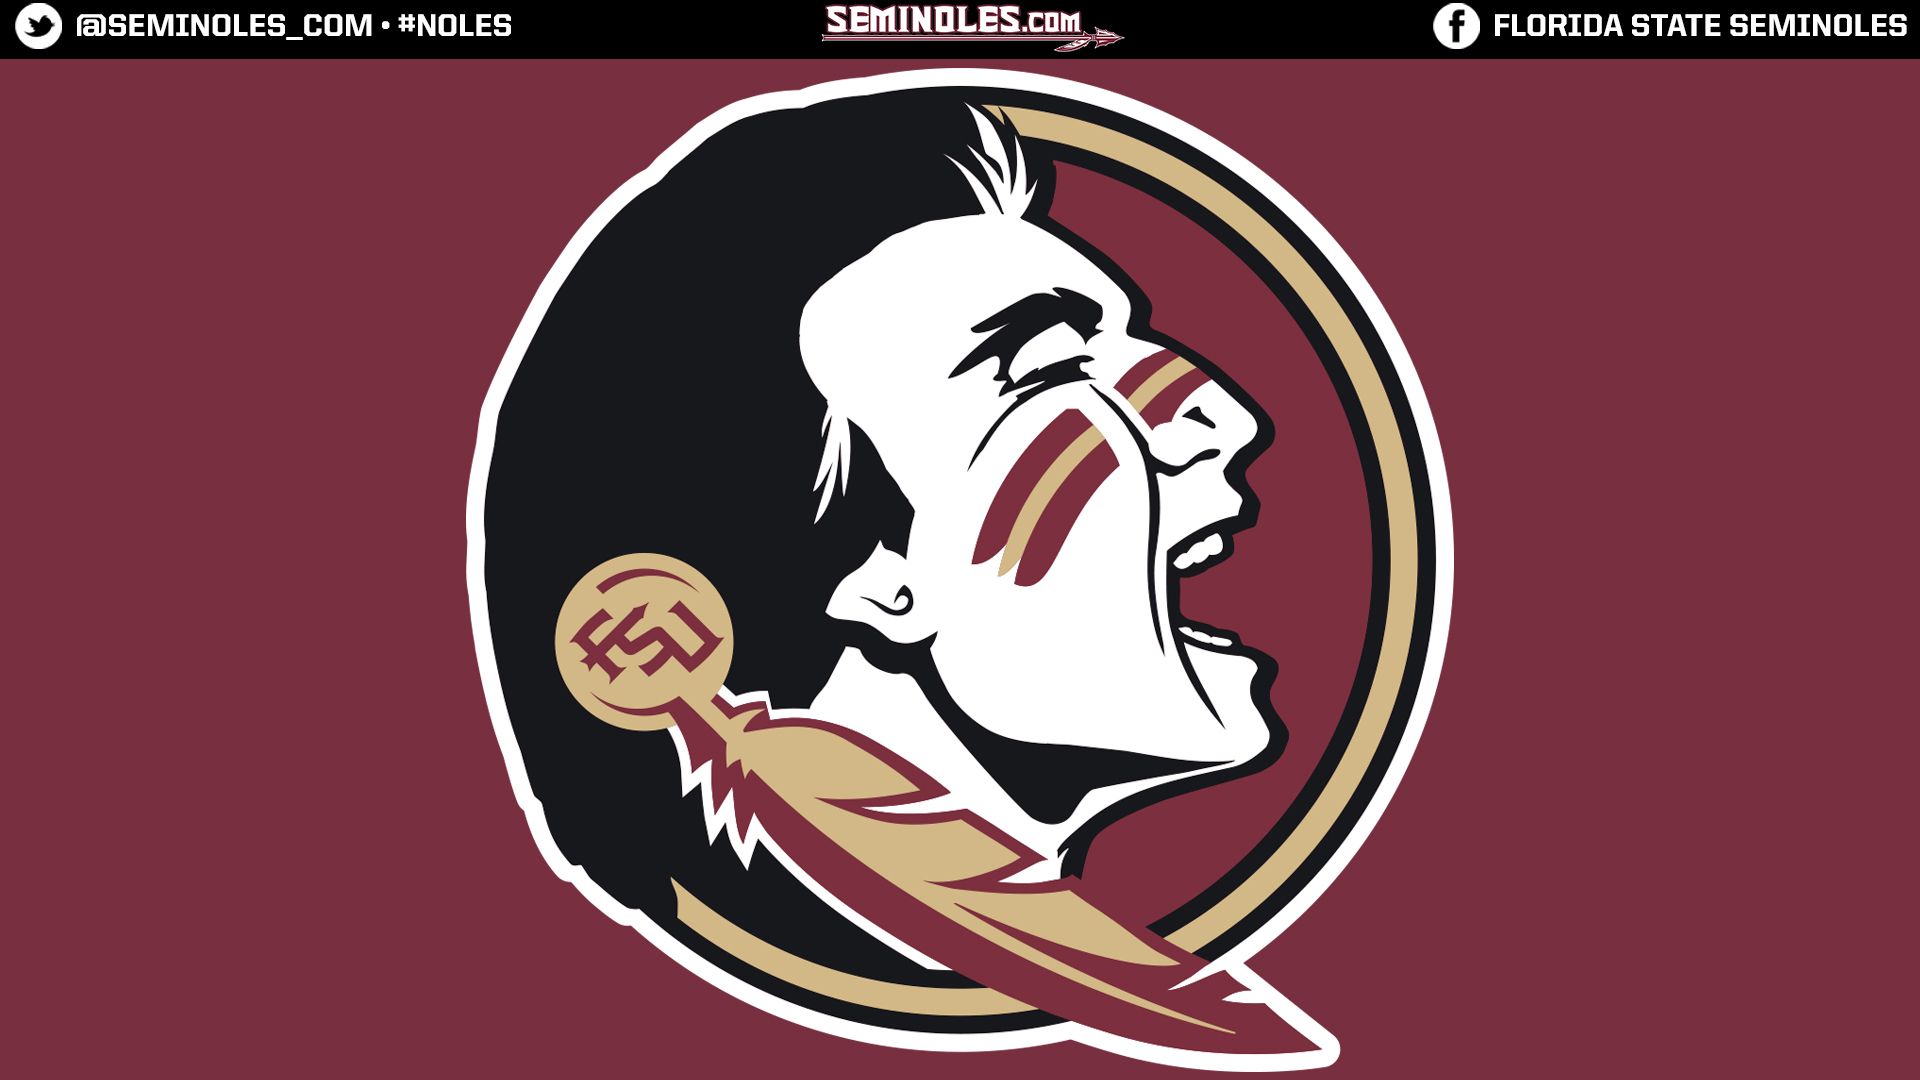  life on campus weve got the Florida State wallpapers you need